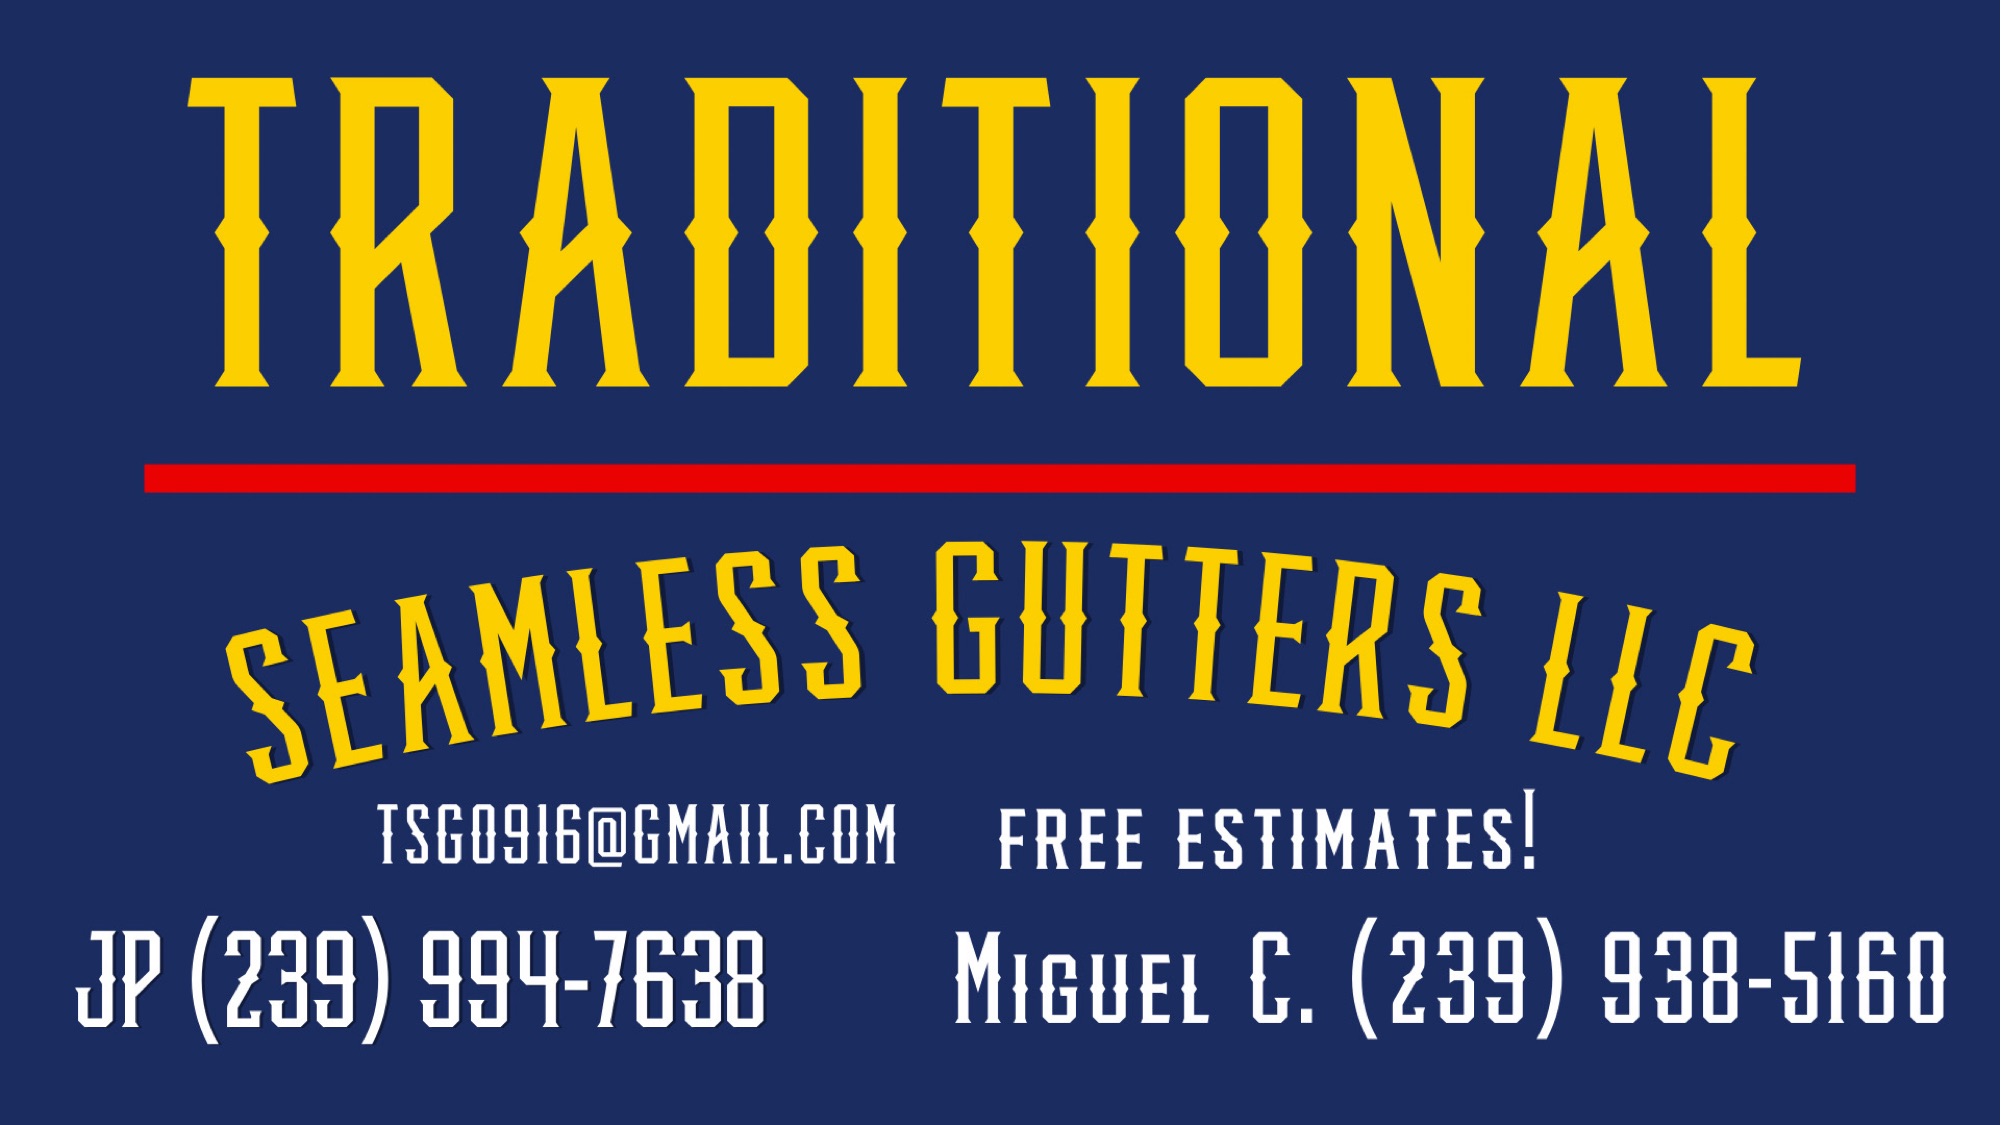 Traditional Seamless Gutters Logo